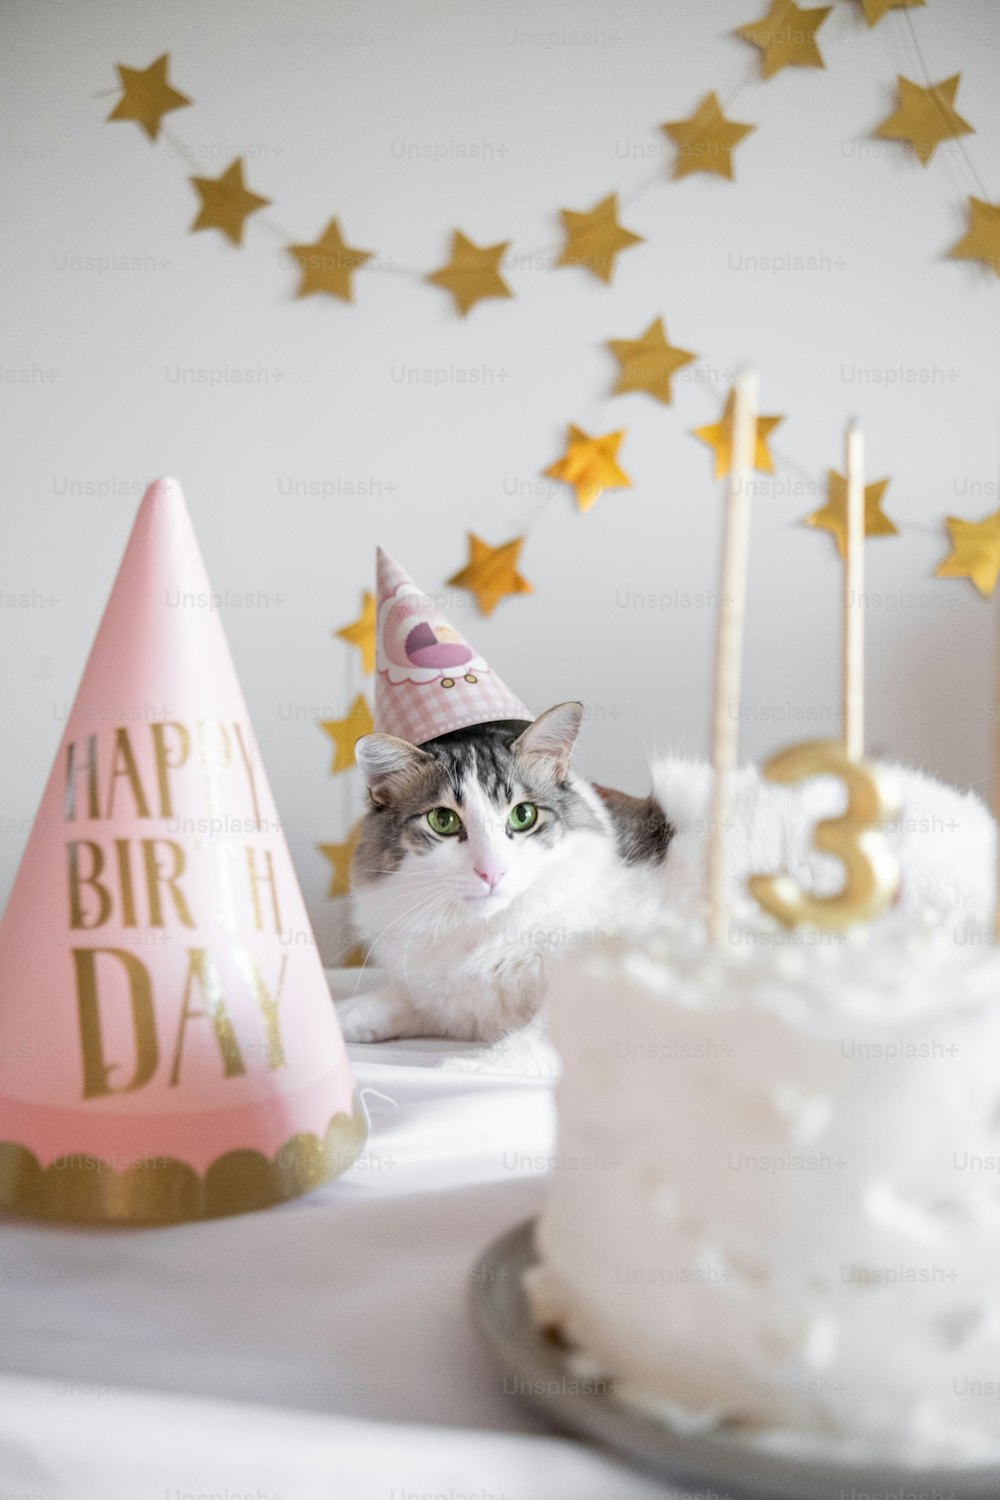 a cat sitting in front of a birthday cake